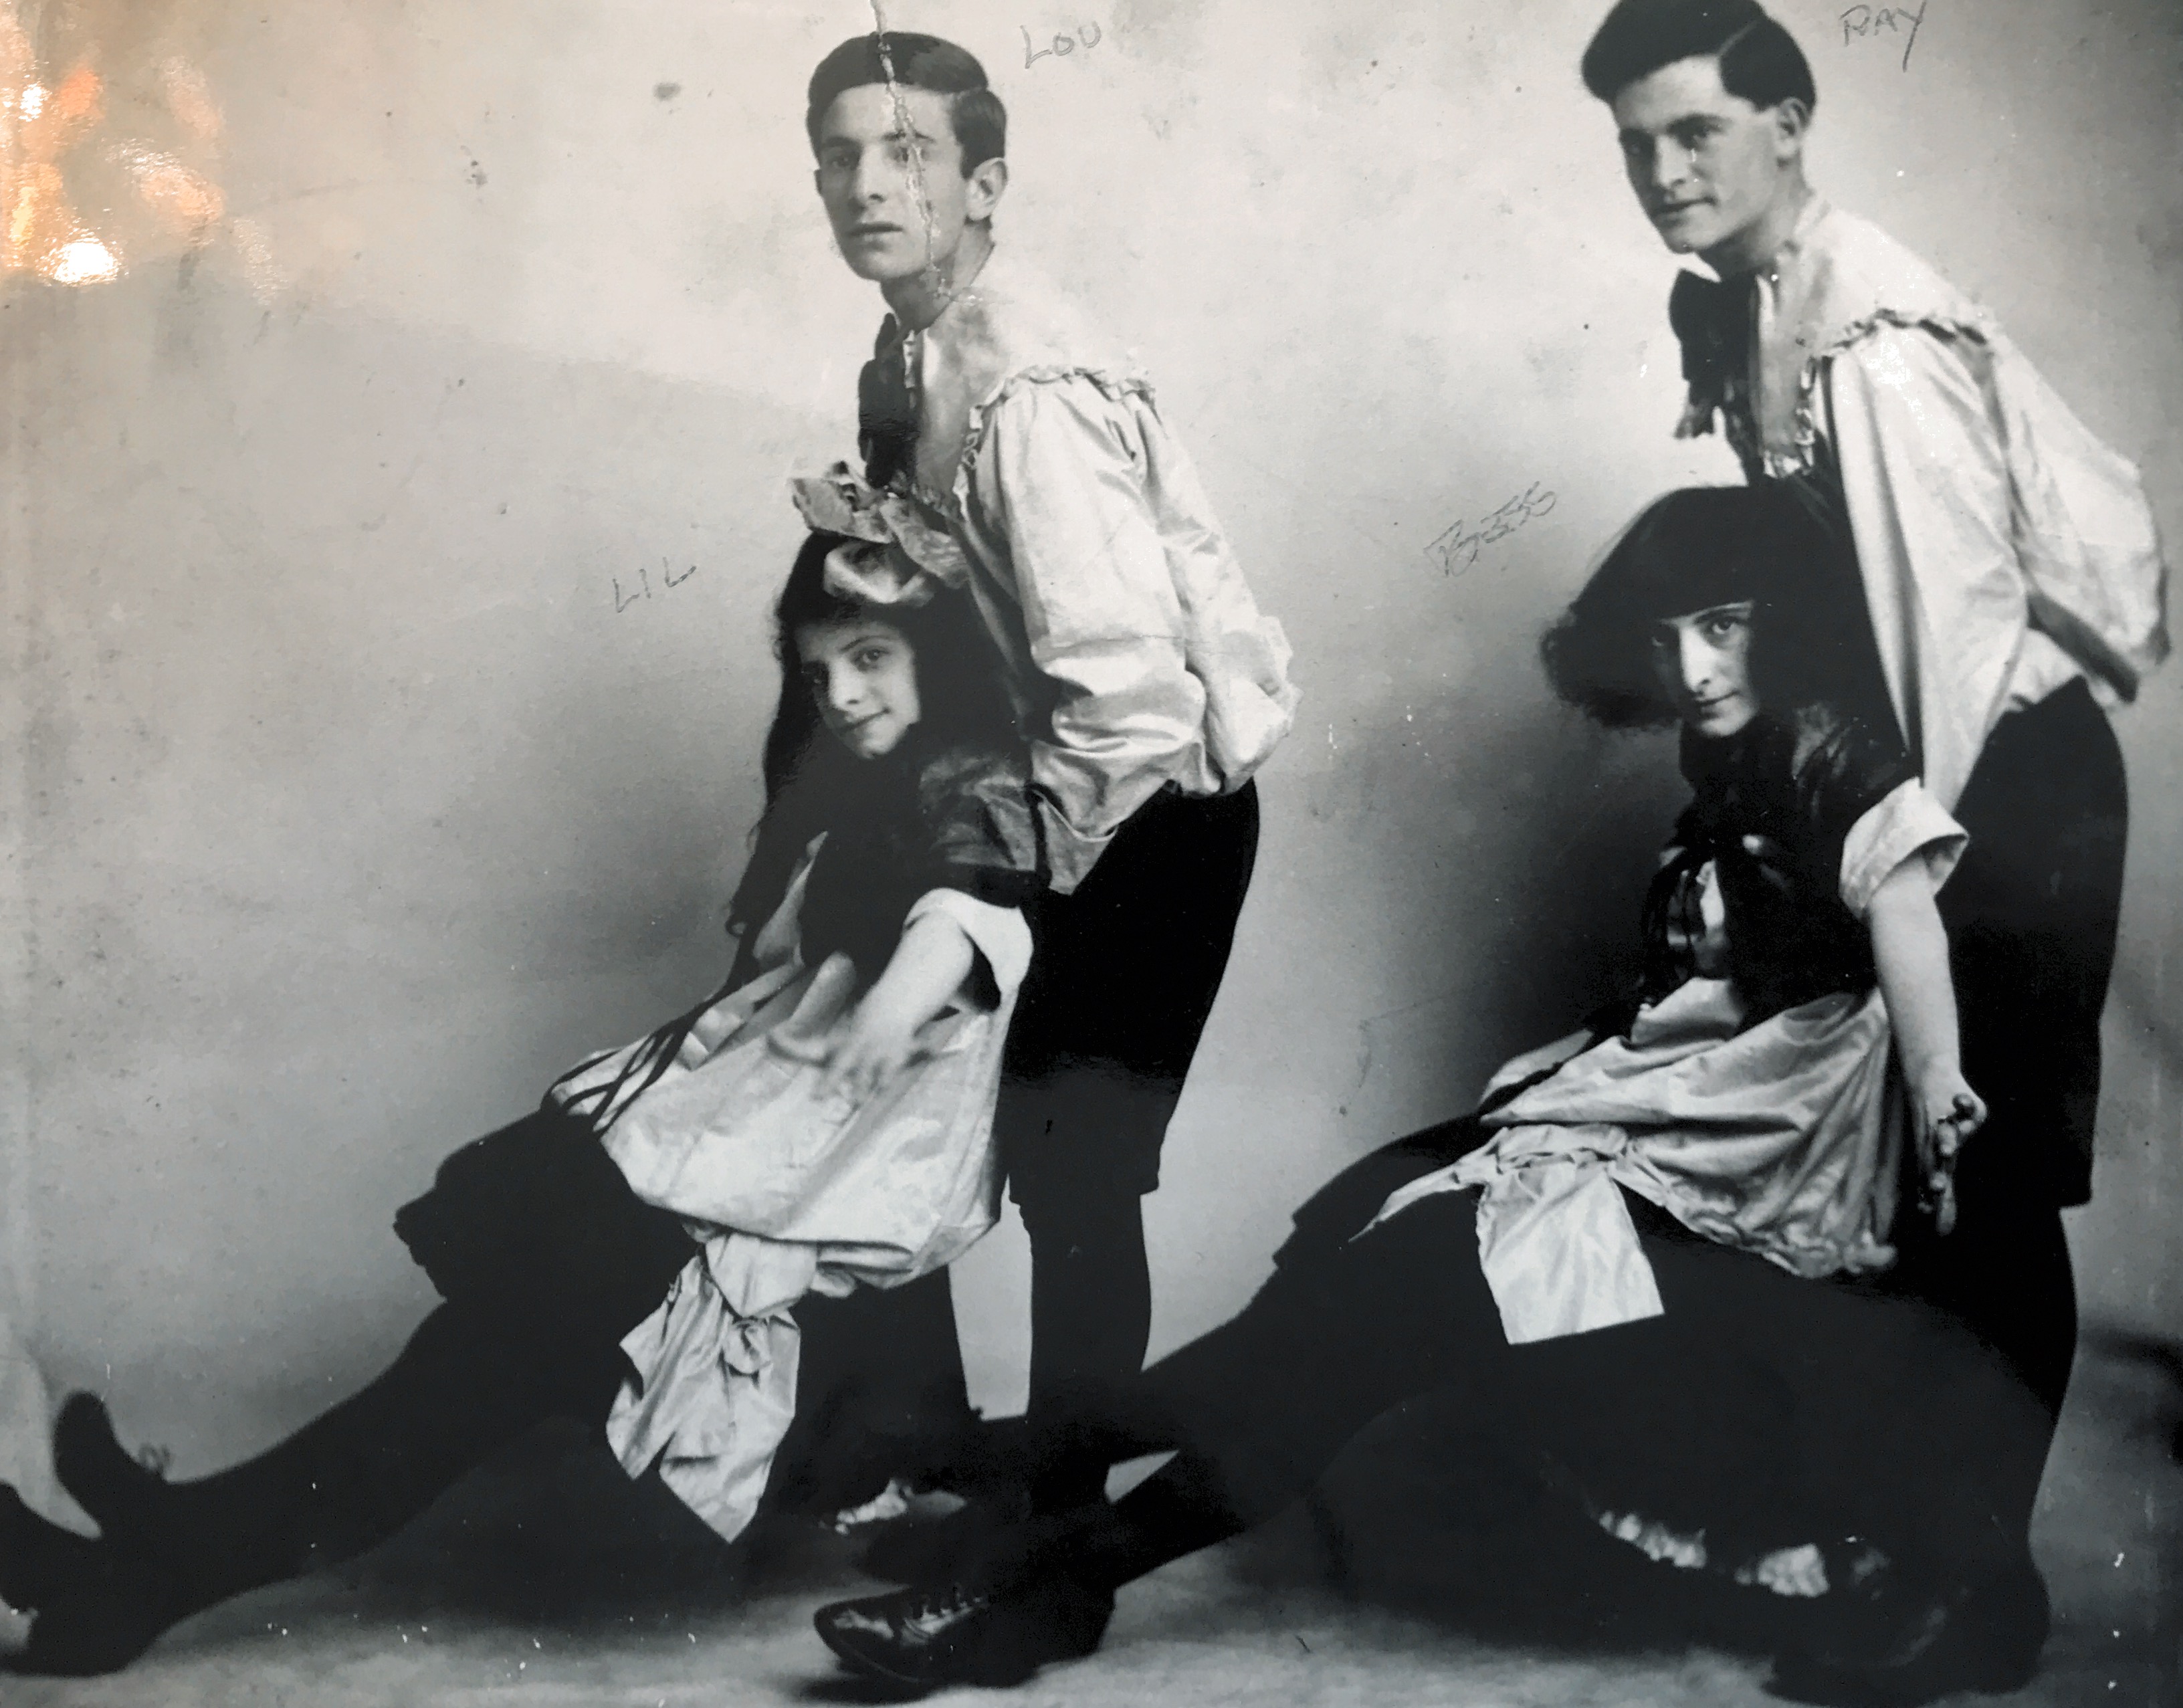 About 1912 “The Four Dancing Lubin’s”  Actually there were five Salsburg siblings who sang and danced in this traveling Vaudeville act. The fifth was a stand-in (substitute) sister, Fan.   Pictured here are brothers Lou (Left), Ray (Right), and sisters Lil (Left) and Bess (Right).  Bess, our maternal grandmother, married our grandfather, Wm E Ashbolt (Papa). They had two daughters, Phyllis - DOB 12/7/1914 (my mother) and Alvira Ruth Born 1917. Bess died in the flu epidemic in October, 1918 at the age of 24. Papa re-married Katheryn Gertrude Allen, a WWI Red Cross Army (Nurse) veteran who served in France. They had two sons, William A Ashbolt and Allen David Ashbolt.